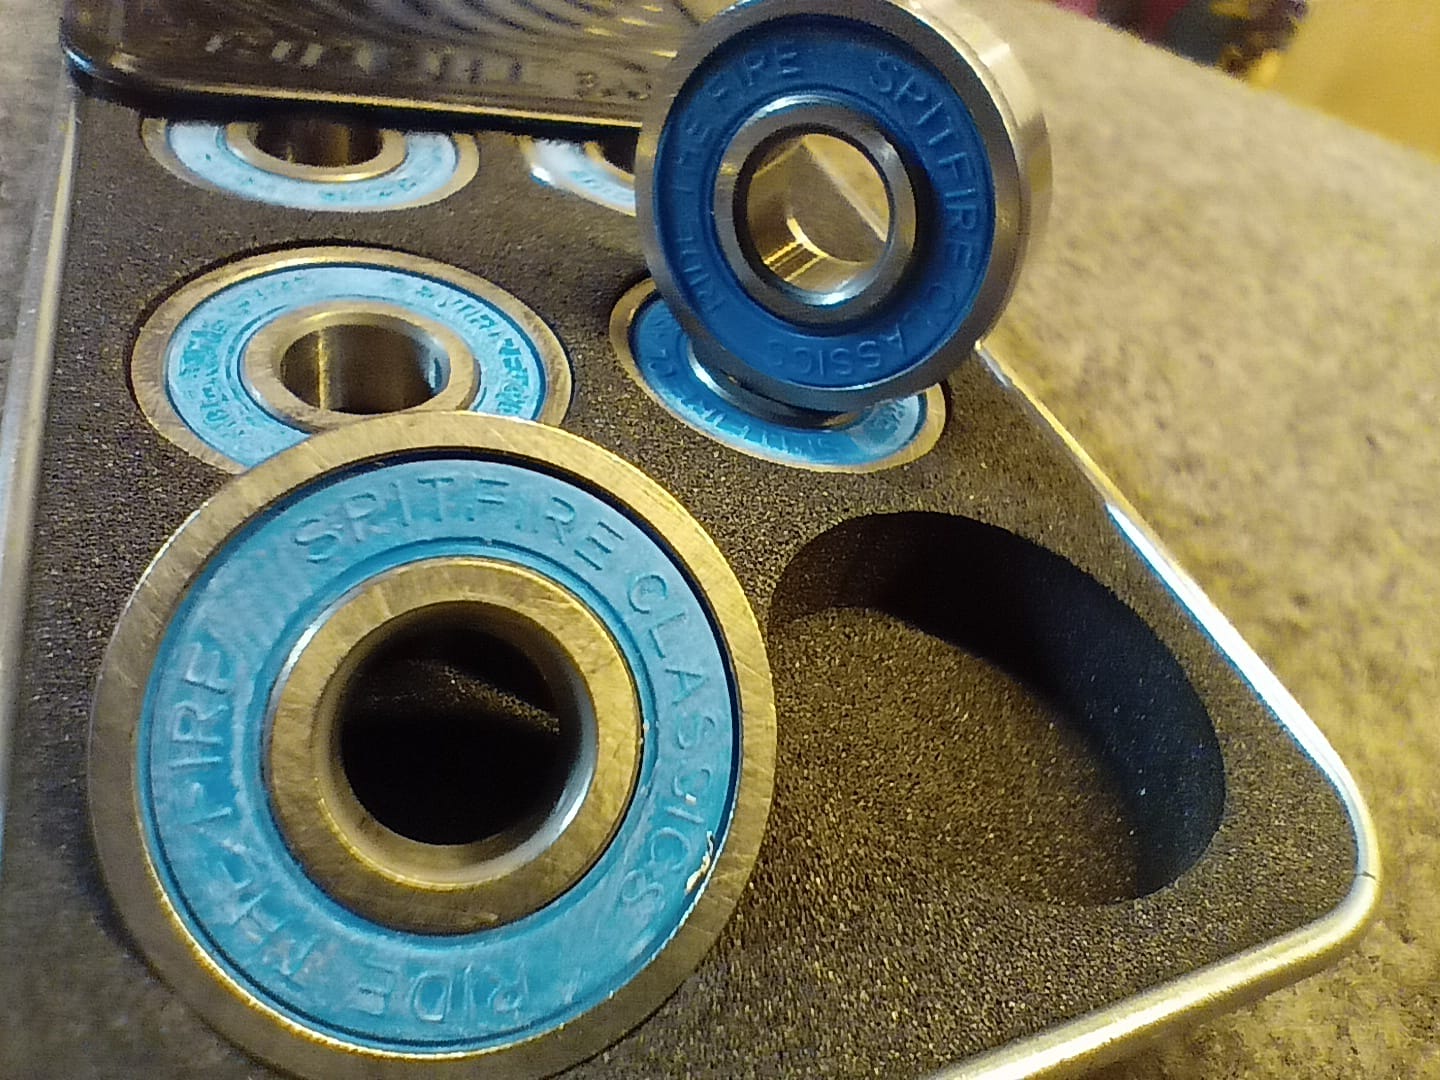 Is assembly required for these bearings?